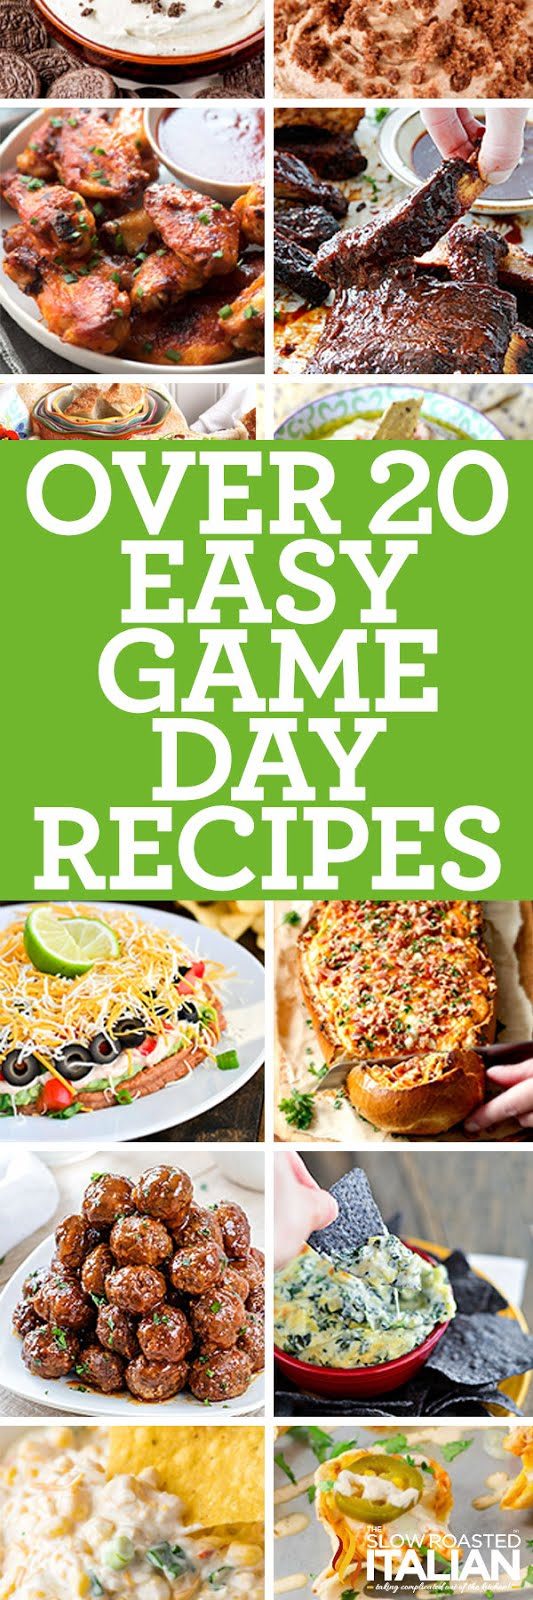 game day recipes collage